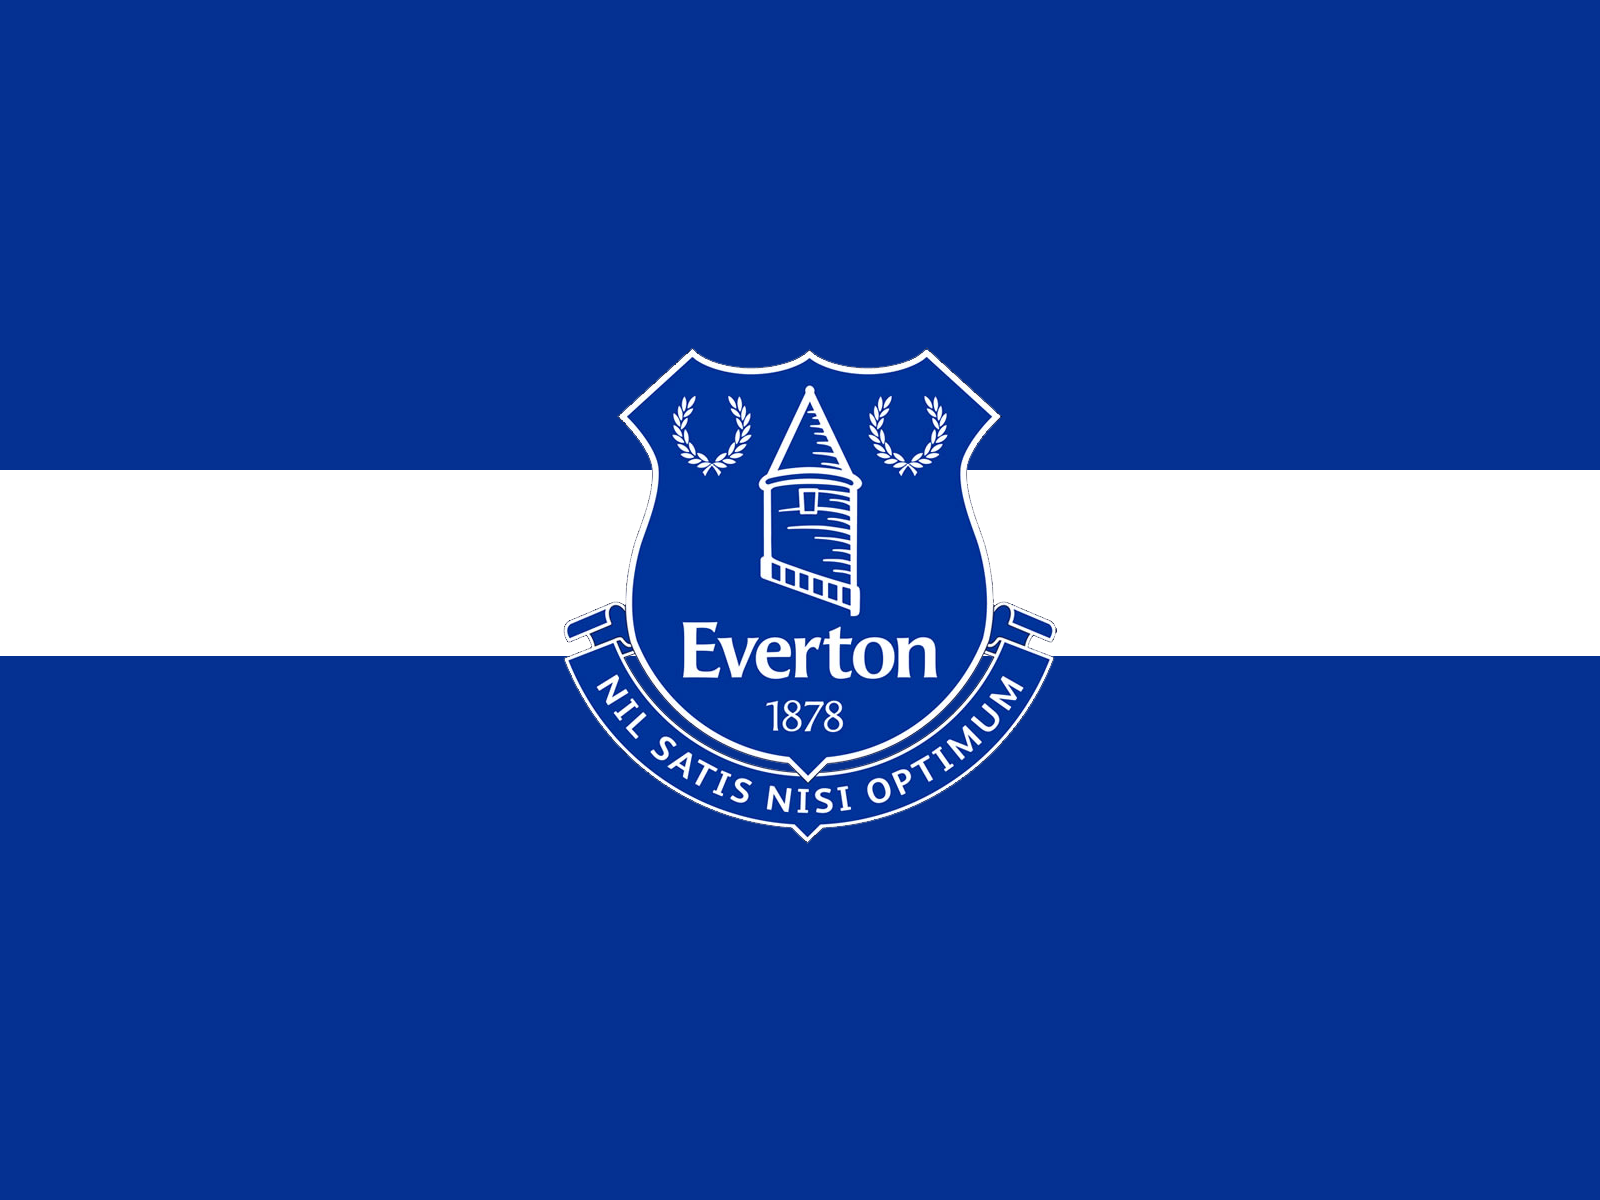 Anybody have any wallpapers with the new crest on Everton